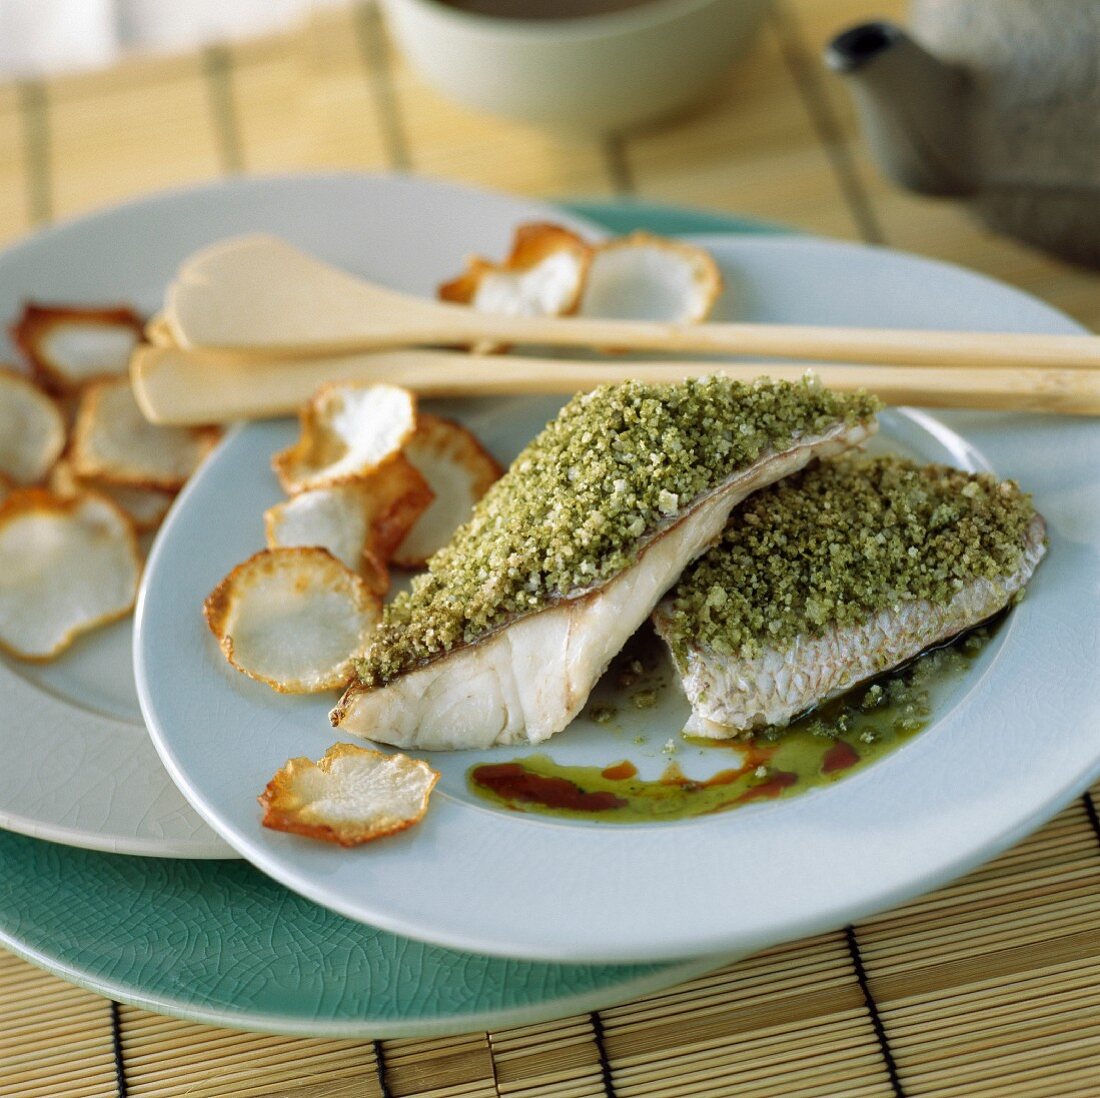 Porgy fillets with green tea crust and warm dressing